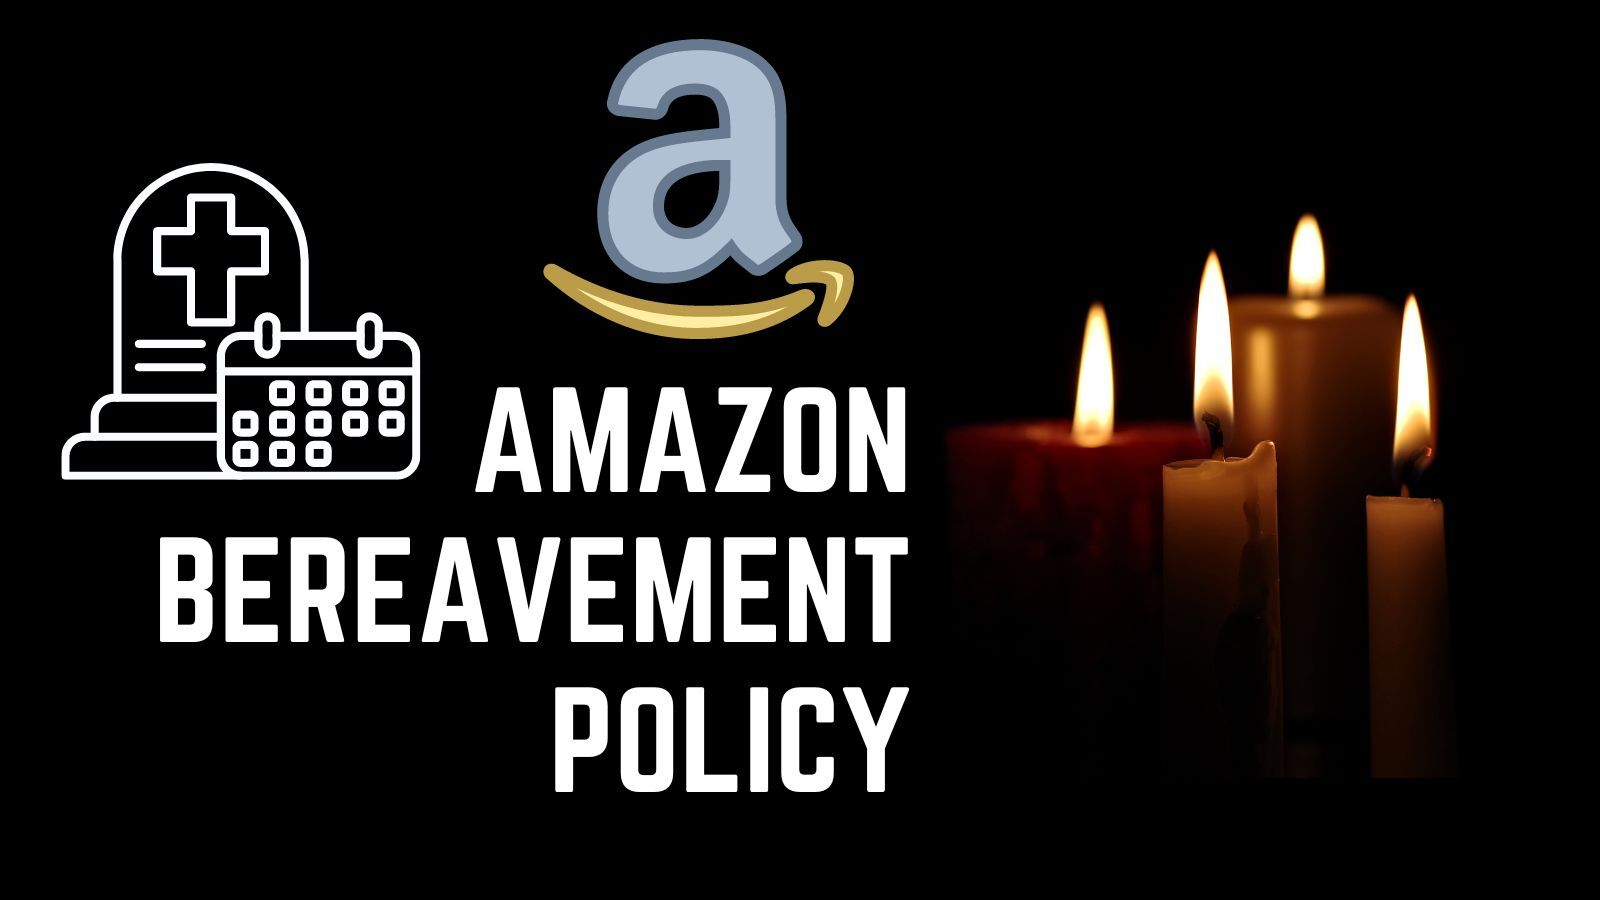 Amazon Bereavement Policy (Things You Need to Know) Cherry Picks